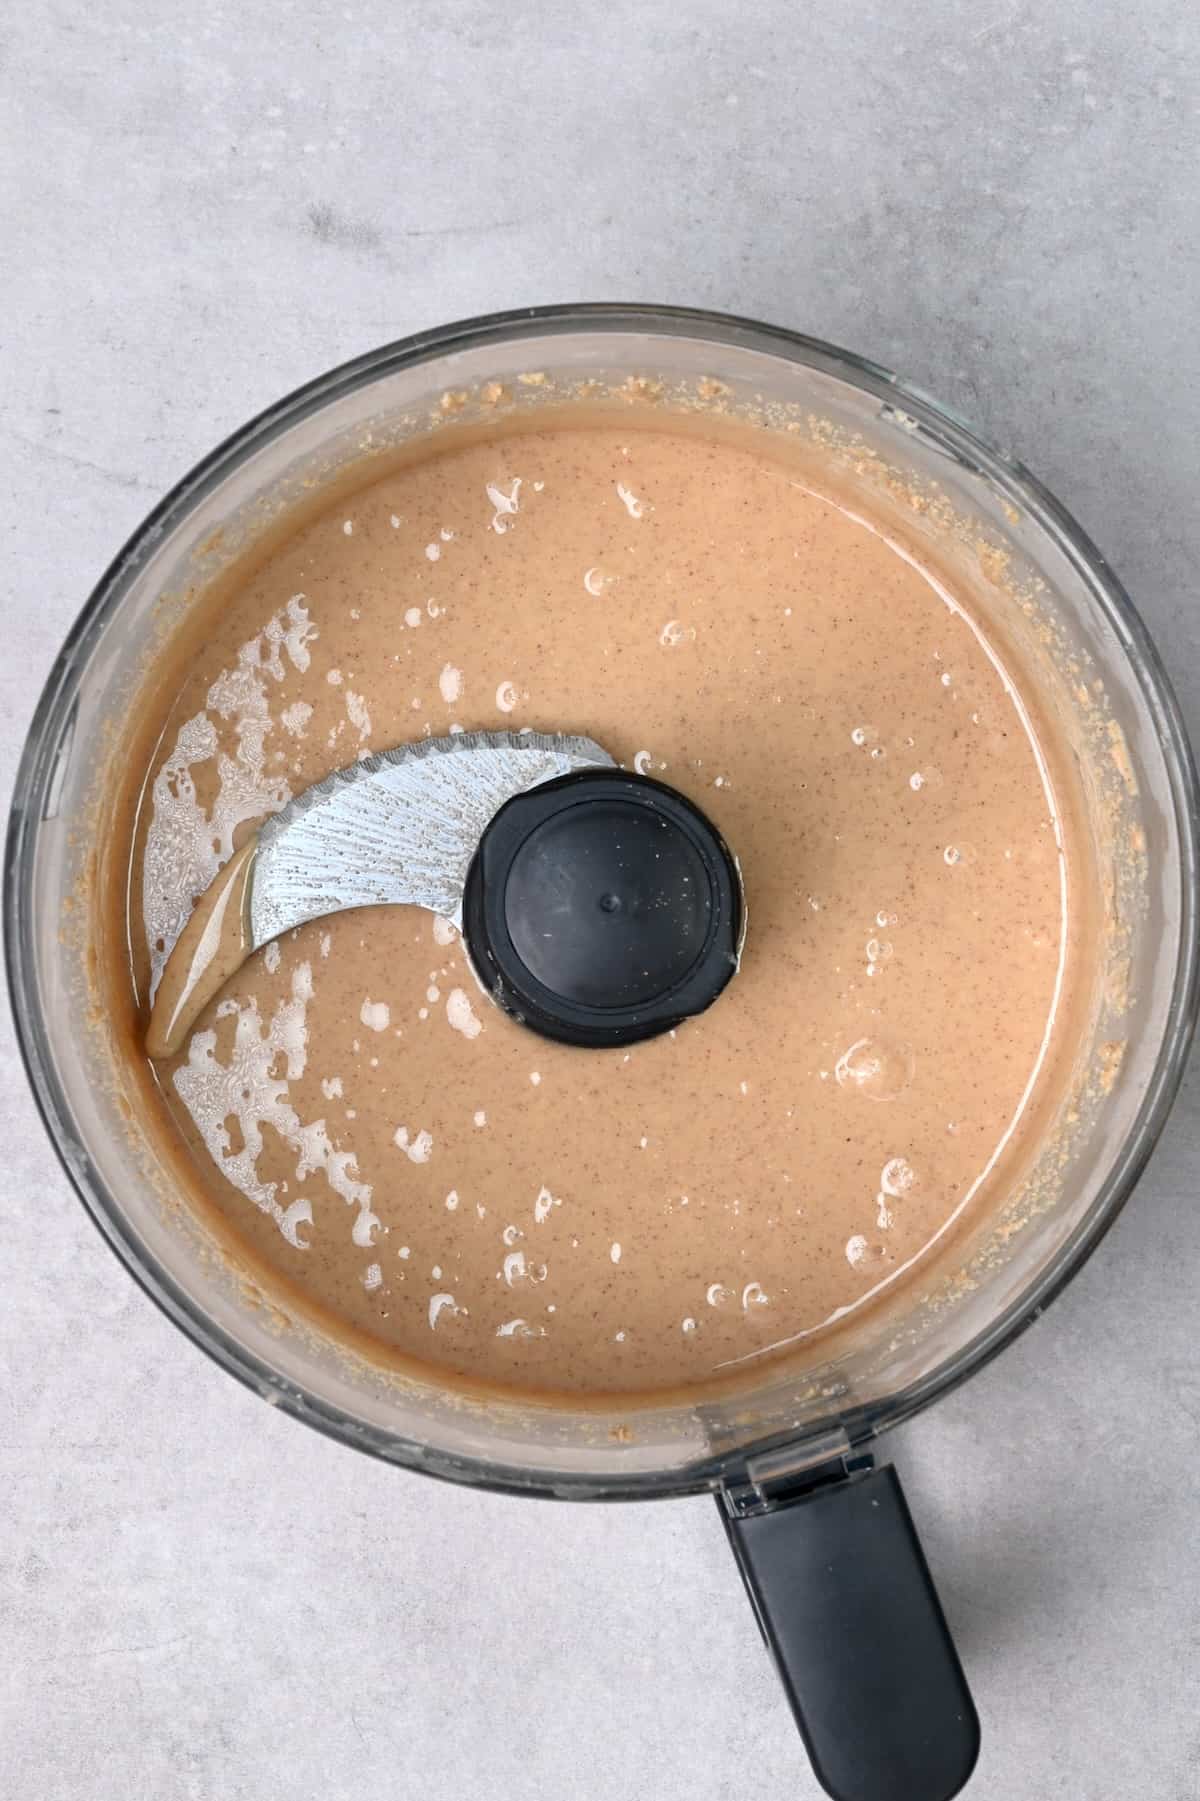 Homemade peanut butter in a food processor